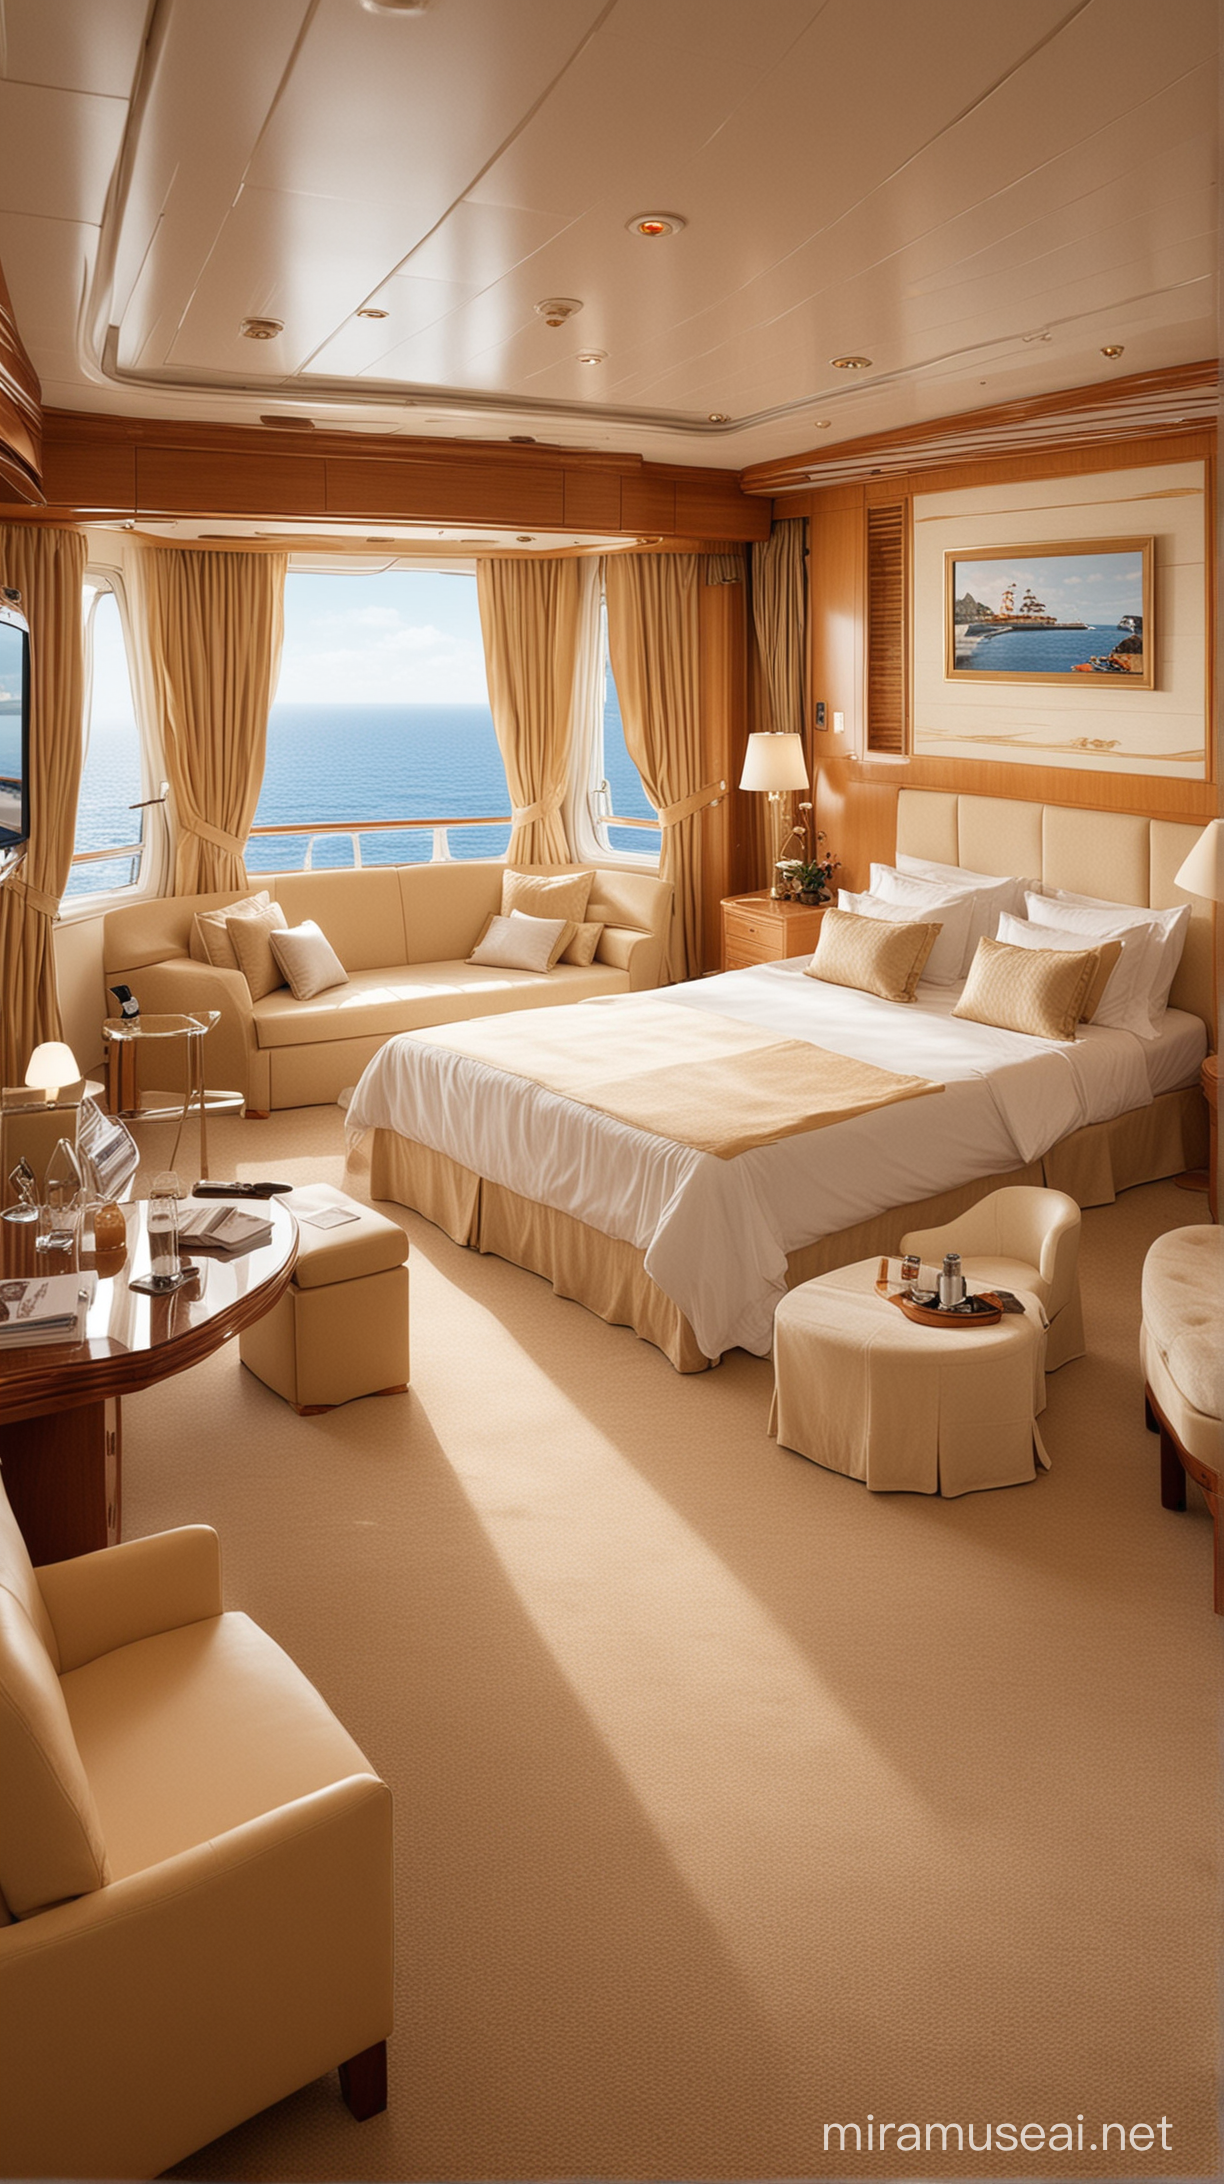 Luxurious room on a cruise ship